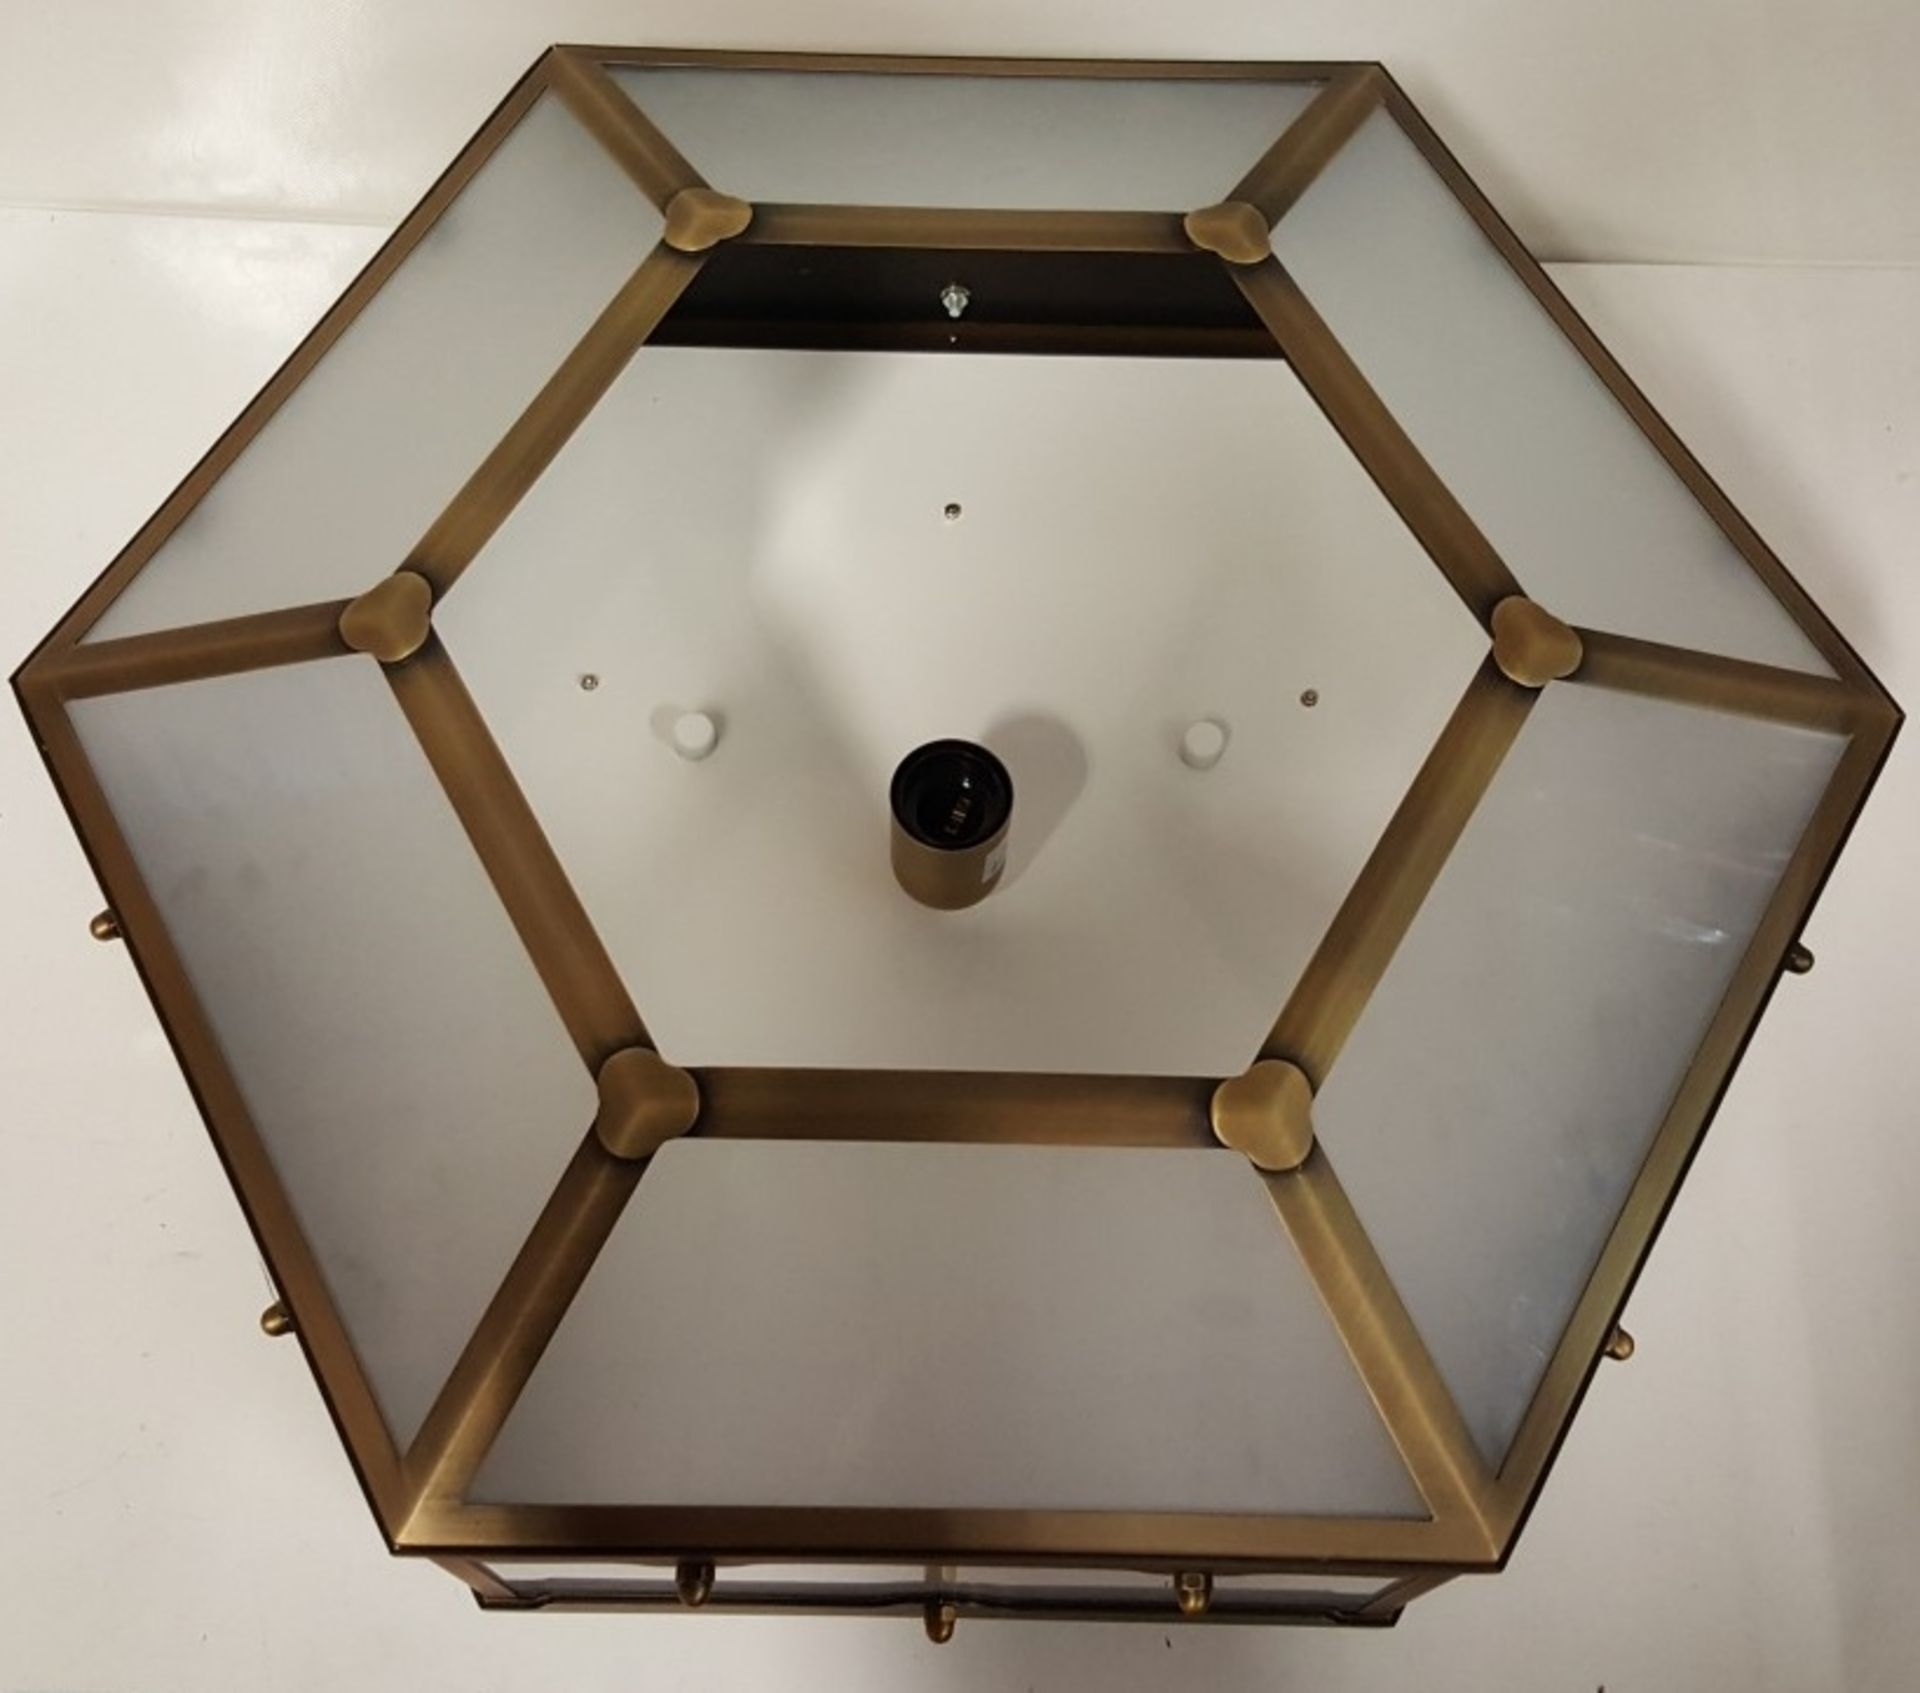 1 x Chelsom Flush Fitting Hexagonal Shaped Light Fitting In A Antique Brass Finish - REF:J2374 - Image 5 of 7